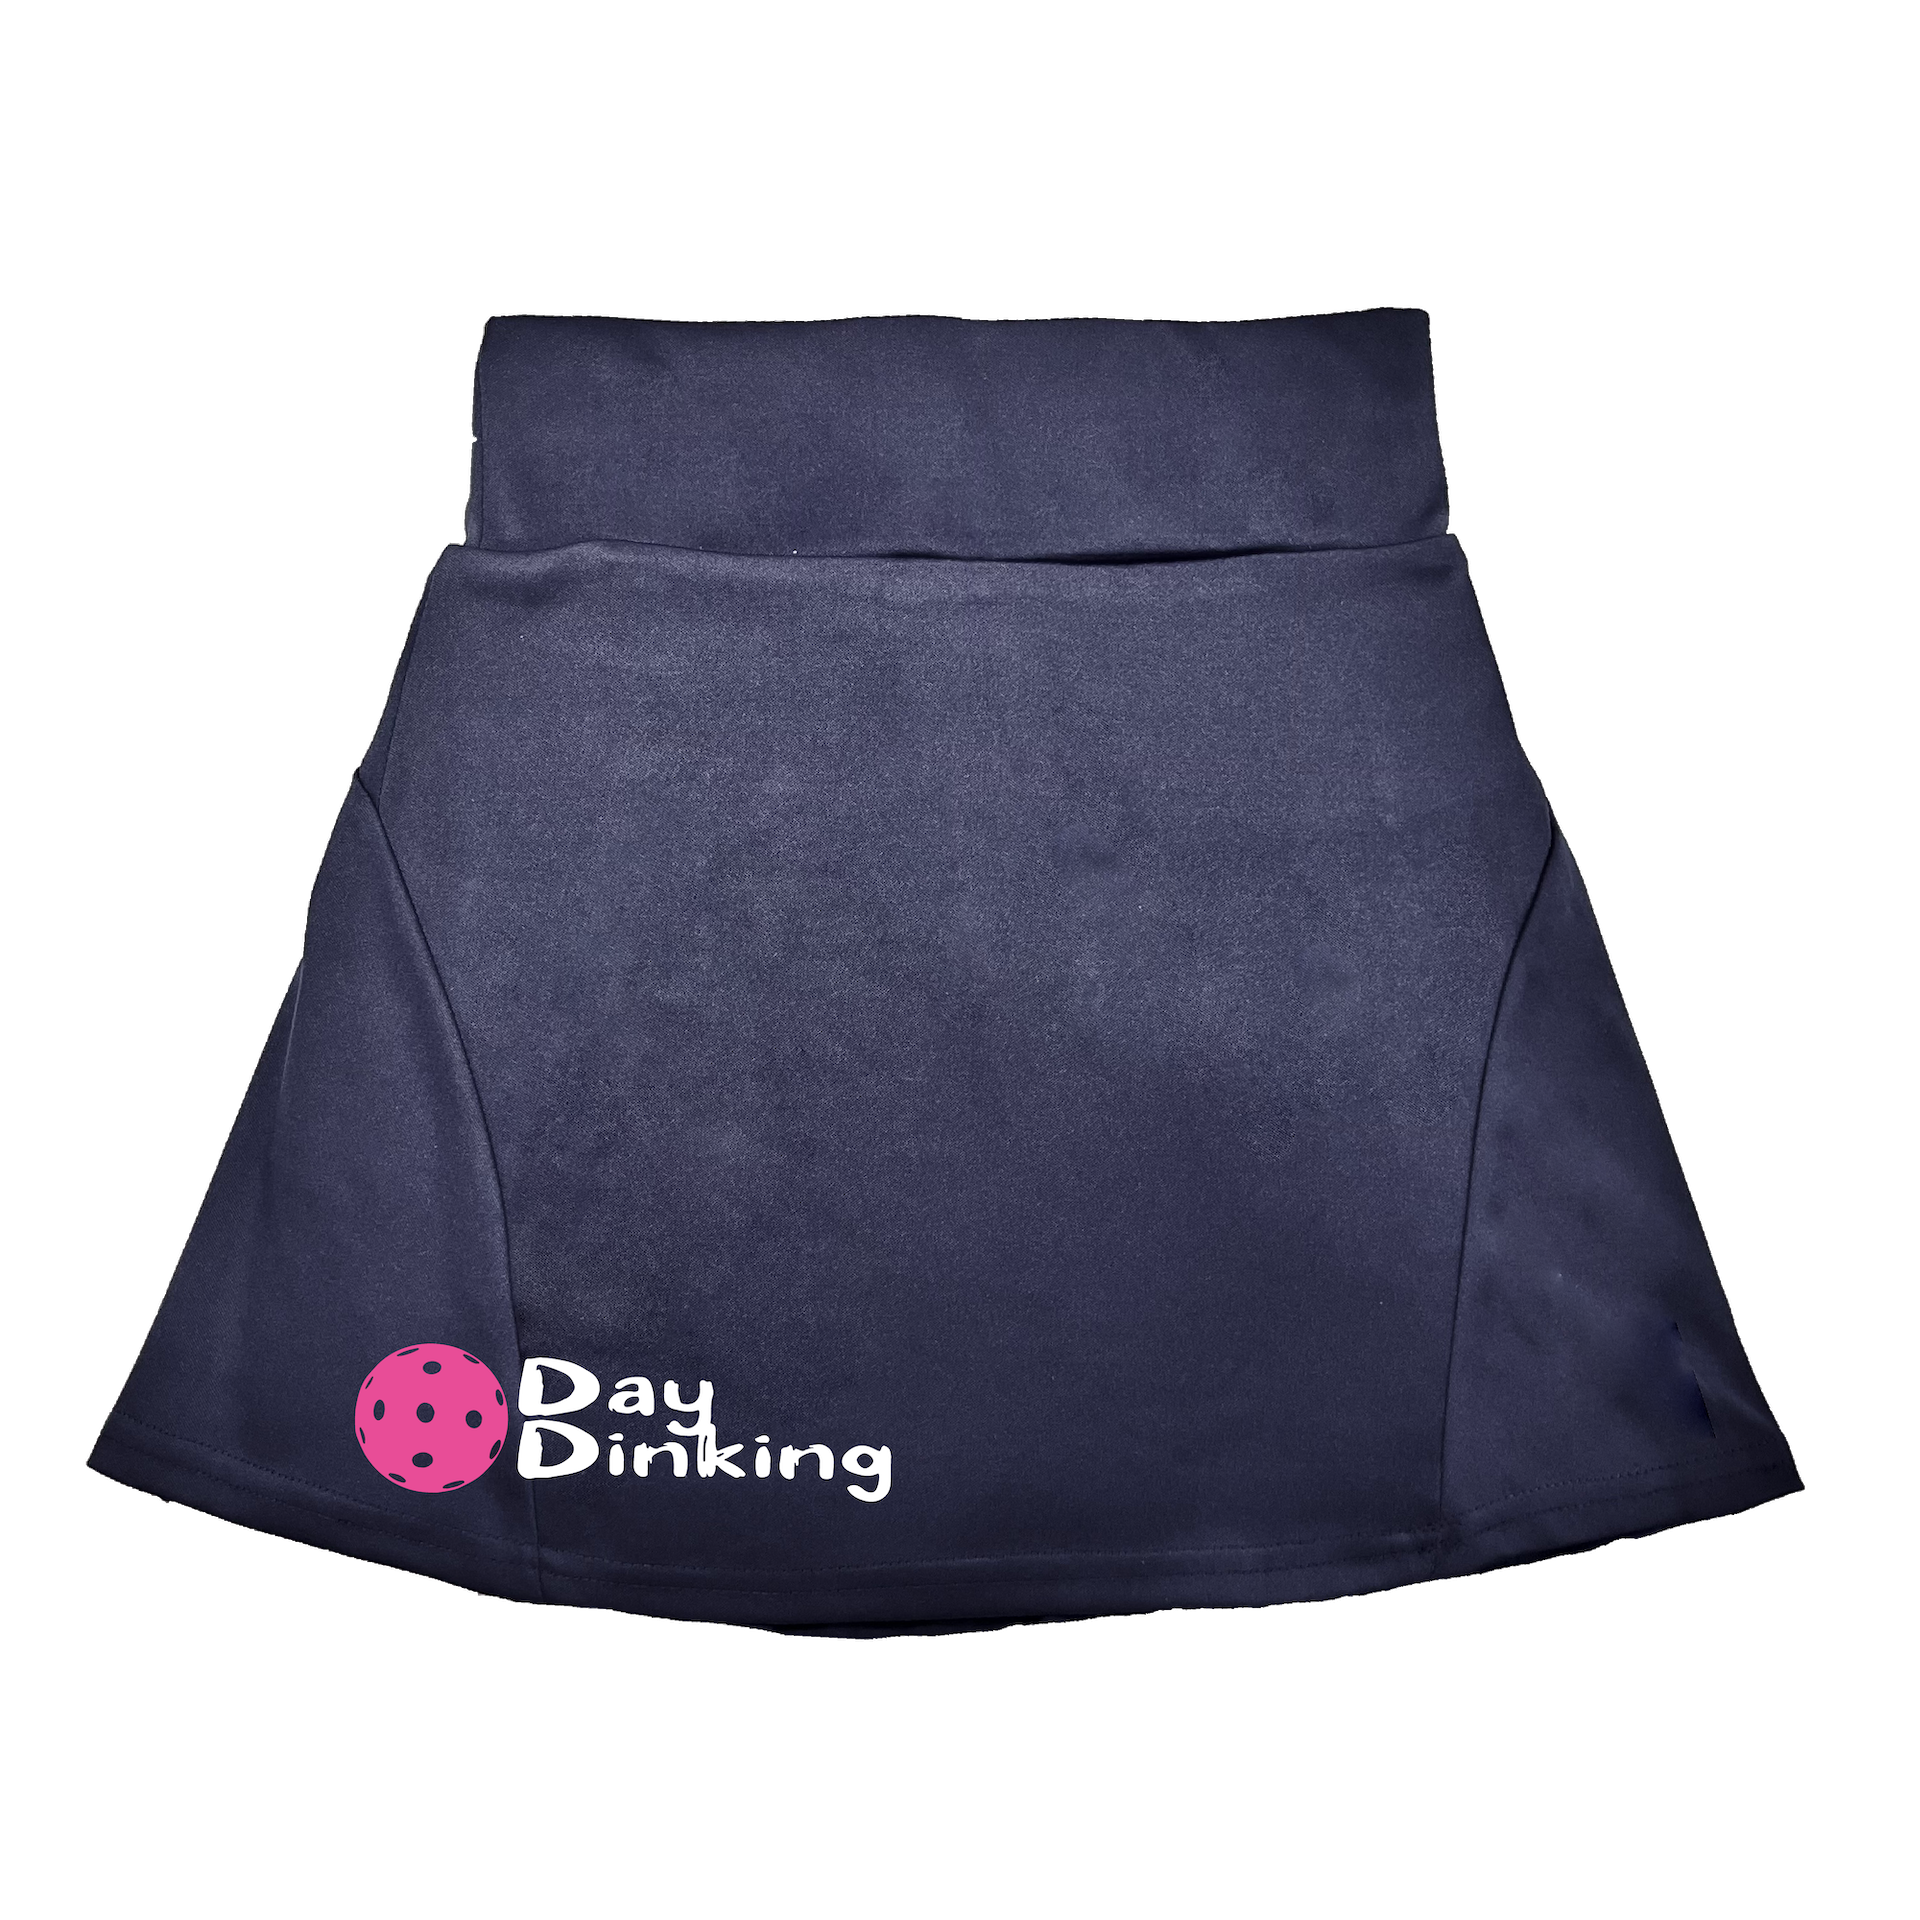 Pickleball Flirty Skort in White, Yellow or Pink.  These flirty skorts have a flat mid-rise waistband with a 3-inch waistband.  Light weight without being see through and the material wicks away moisture quickly.  Flirty pleats in the back with inner shorts for free movement and stylish coverage on the courts.  A functional zipper pocket on the back and two built in pockets on the shorts for convenient storage. The rear pleats are what make these skorts fabulous!  